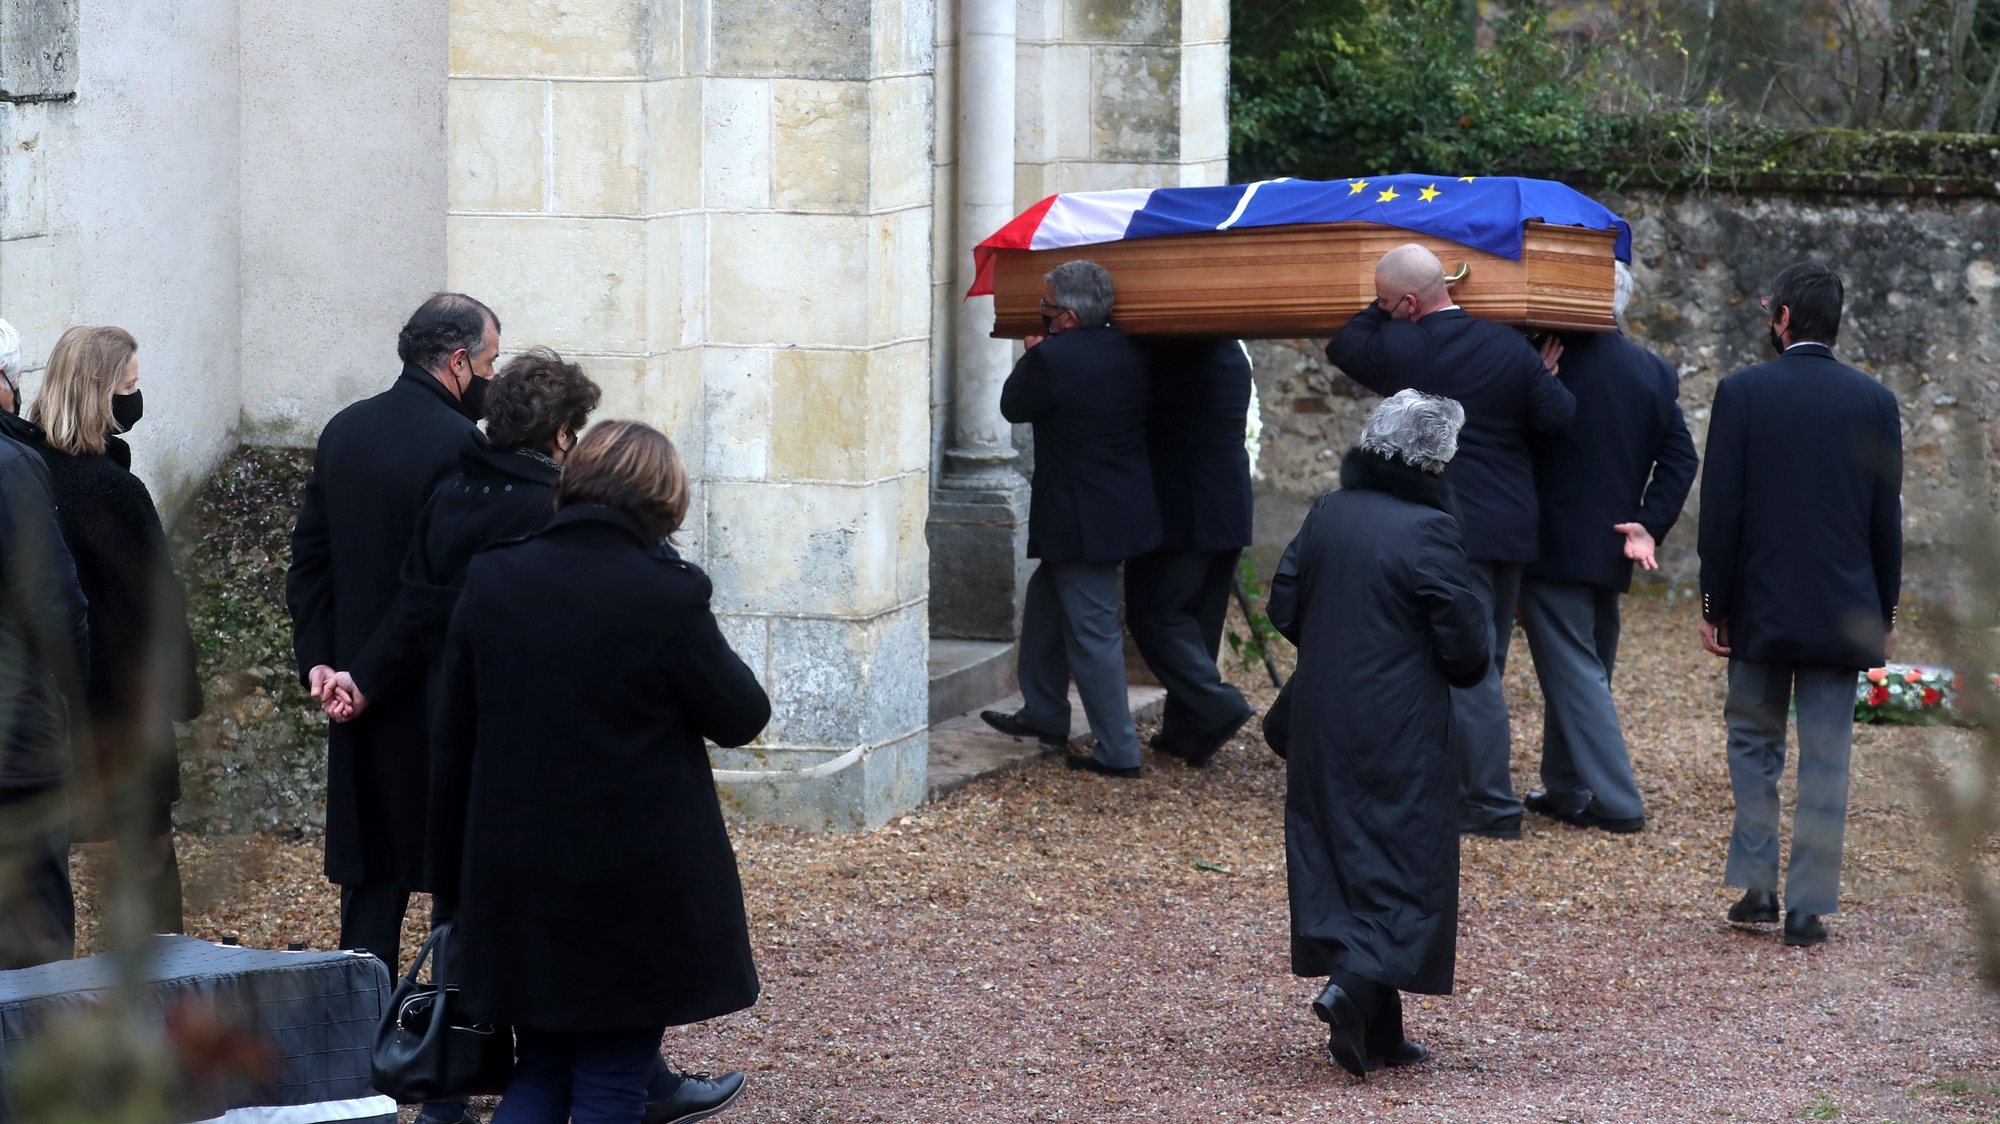 epa08863210 Anne-Aymone Giscard d&#039;Estaing, wife of the late former French President Valery Giscard d&#039;Estaing, and relatives follow the European and French flag-draped coffin containing Giscard d&#039;Estaing&#039;s remains at the Saint Hilaire church in Authon, France, 05 December 2020. Giscard died of complications after contracting COVID 19 disease, at the age of 94. The former French president Valery Giscard D&#039;Estaing was head of state from 1974 to 1981.  EPA/CHRISTOPHE PETIT TESSON